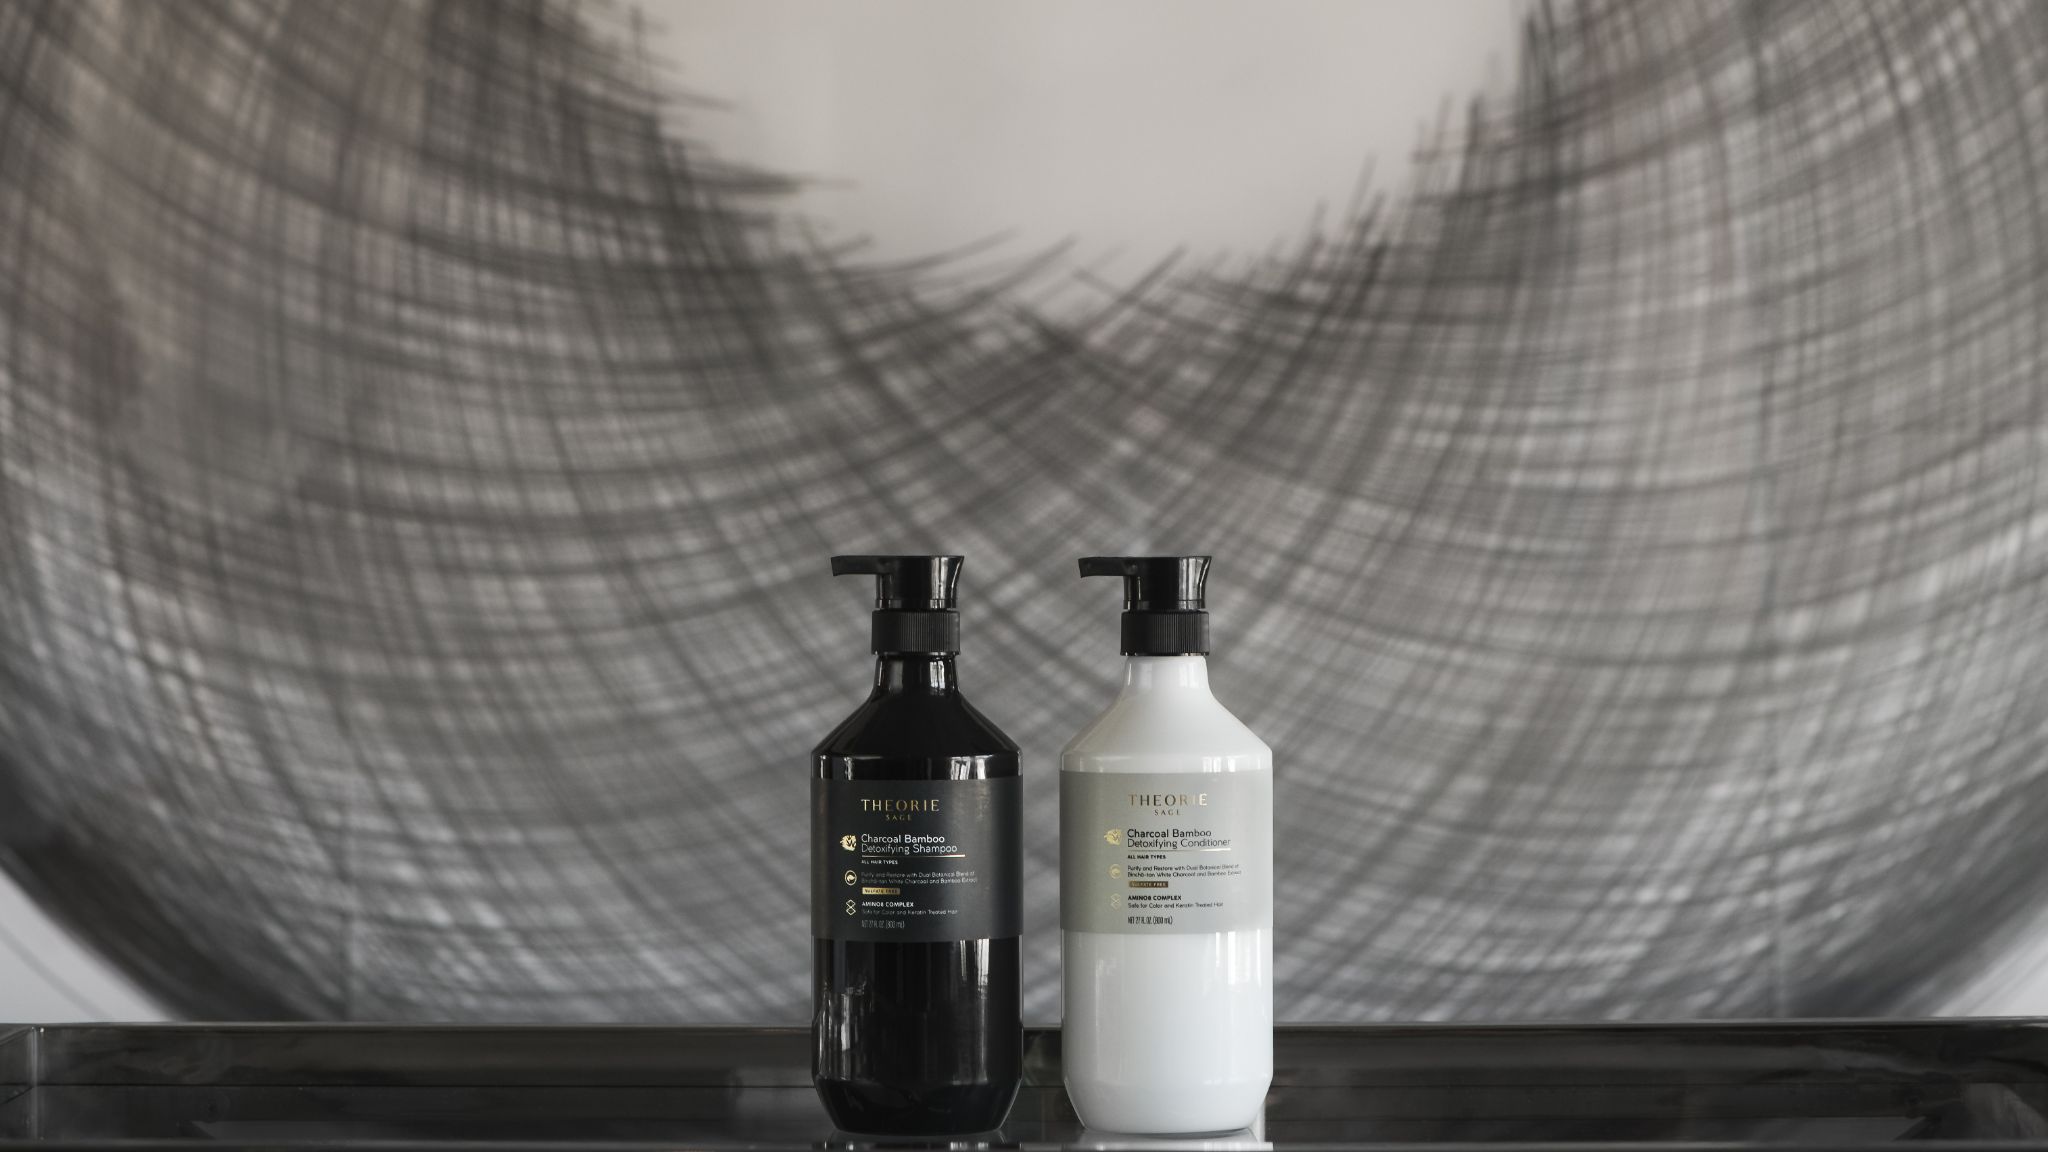 Theorie black detoxifying shampoo and white conditioner dispensers on a black table in front of a gray art form.